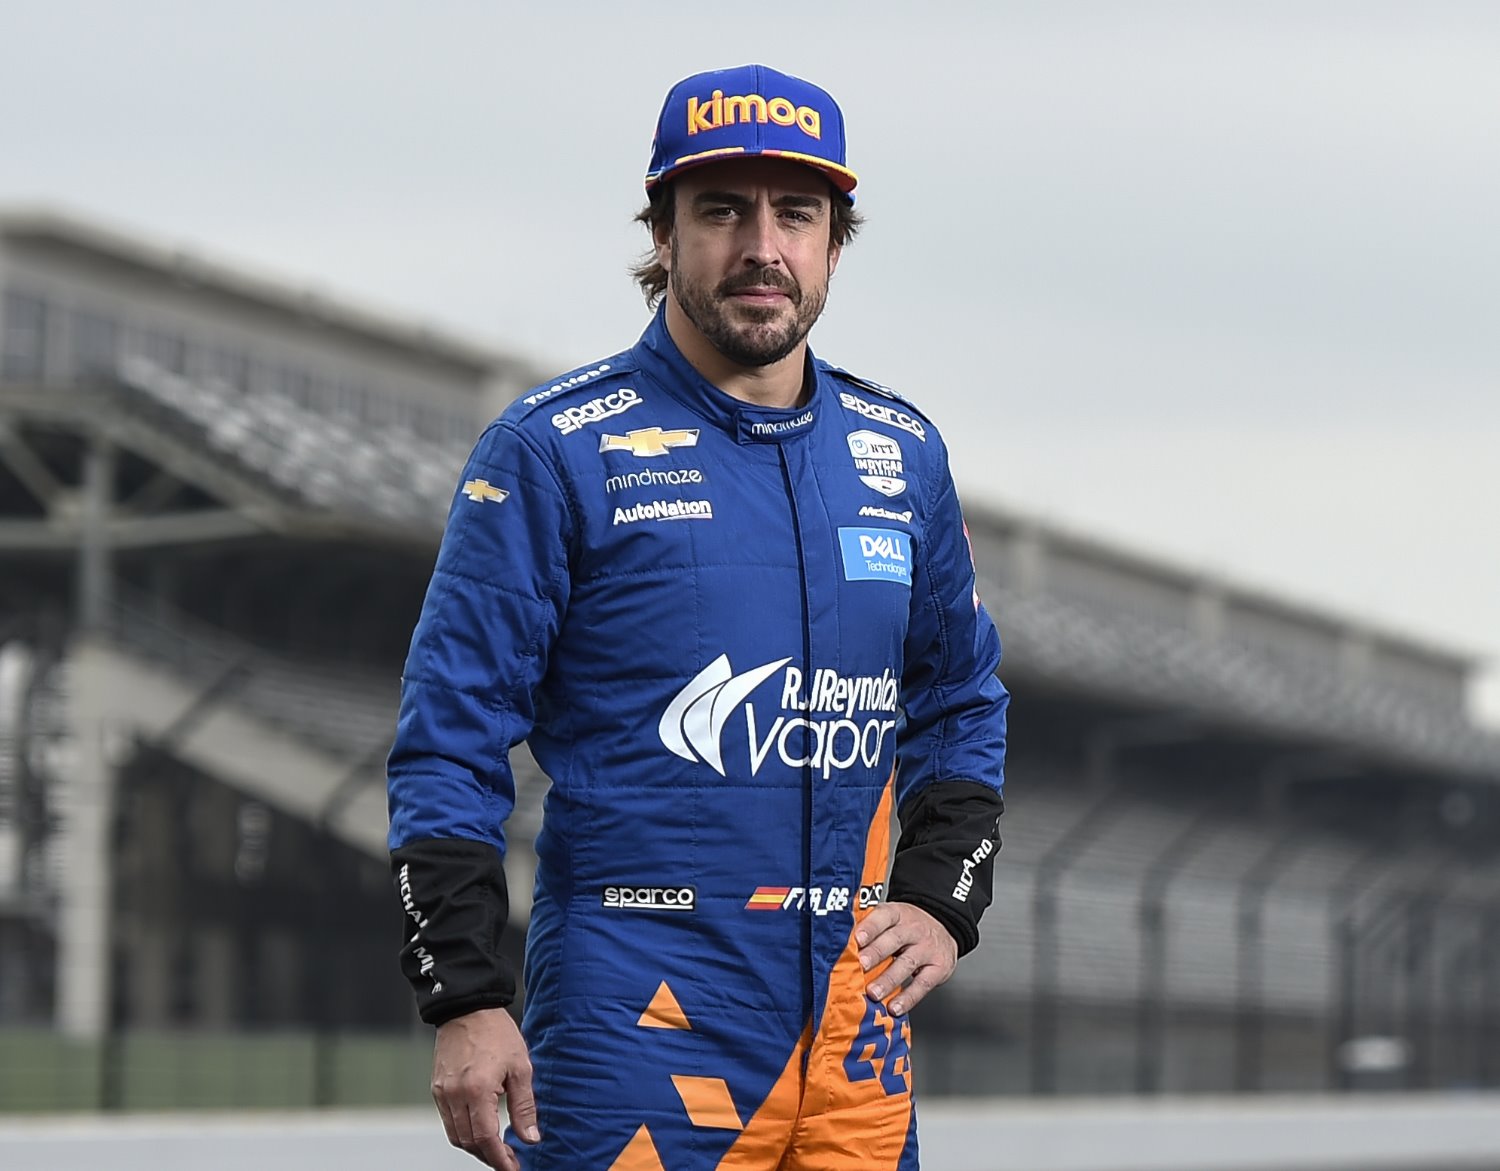 Alonso could replace Bottas at Mercedes, or Vettel at Ferrari if Vettel decides to retire